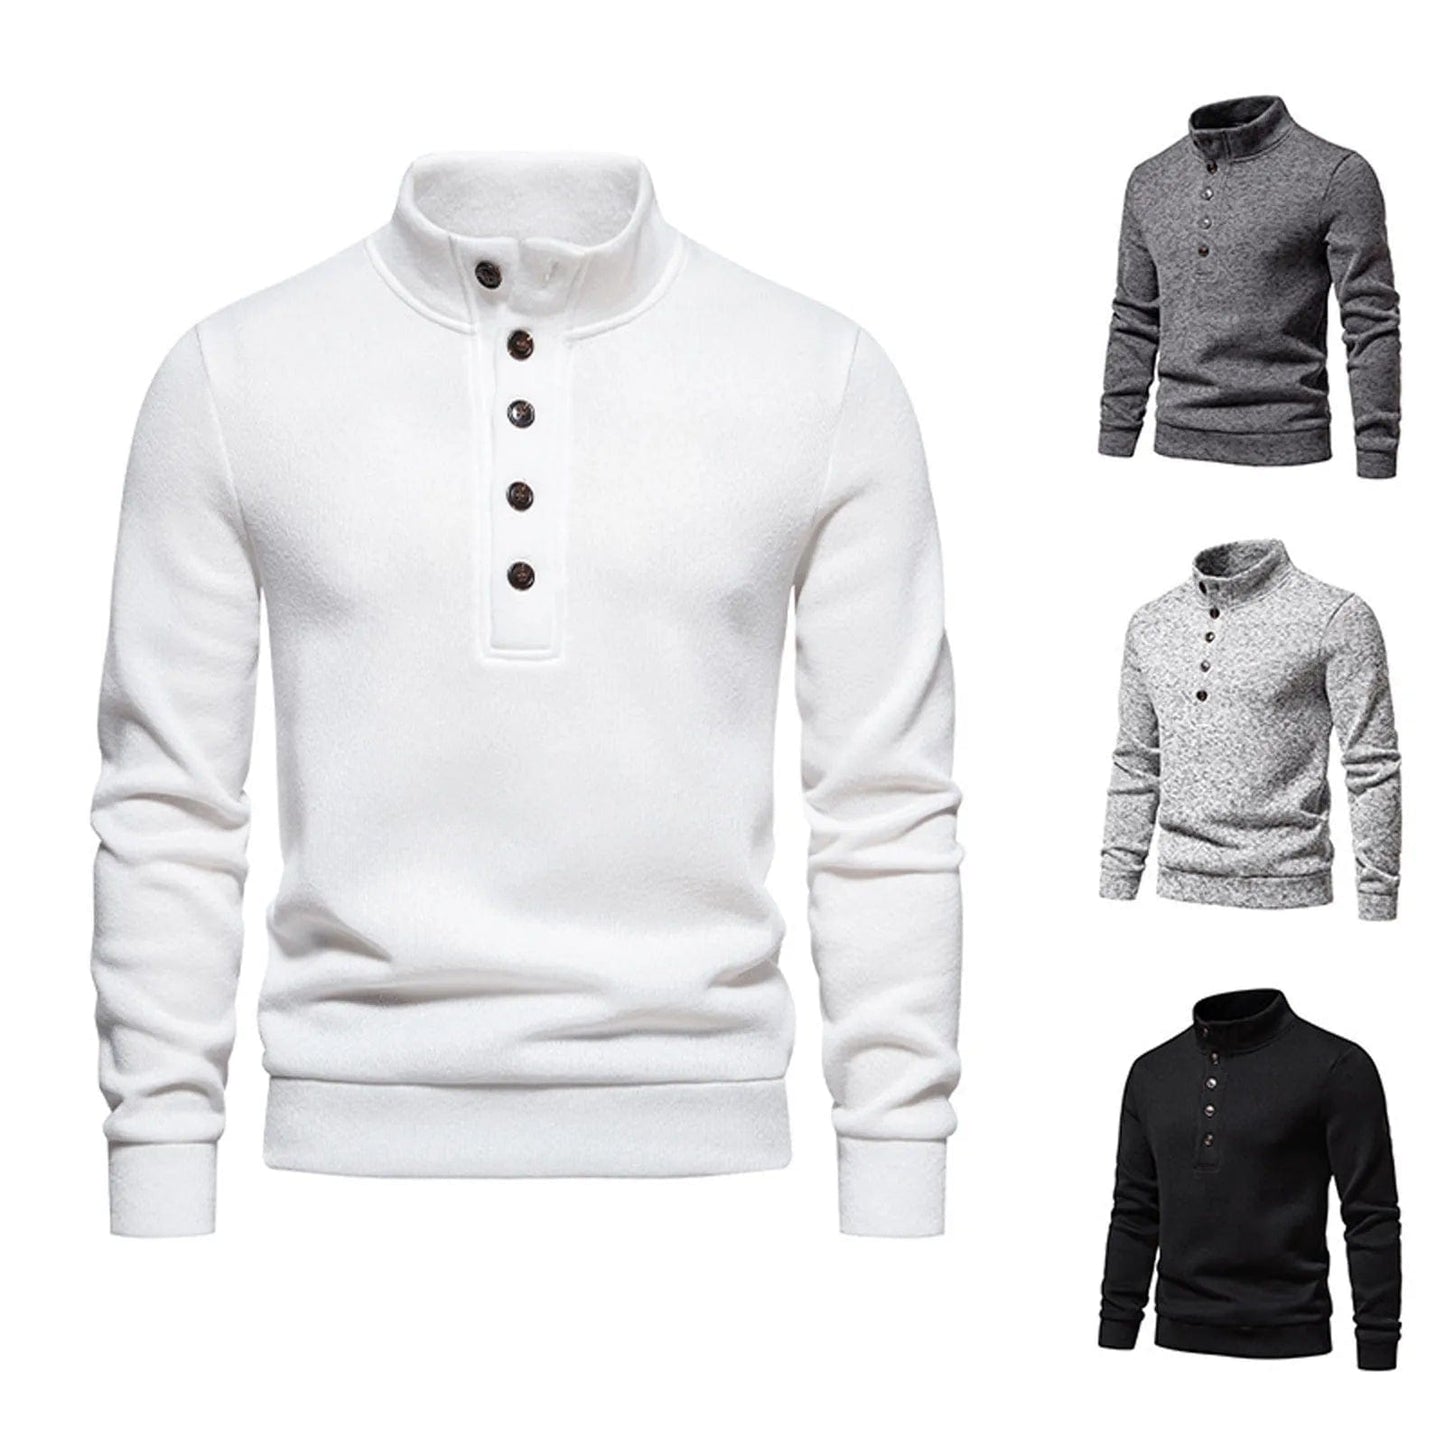 1/4 Button Collar Spring Sweatshirt Mens Warm Sweatshirts Breathable Casual Sports Hiking Turtleneck Pullover Tops Ropa Hombre